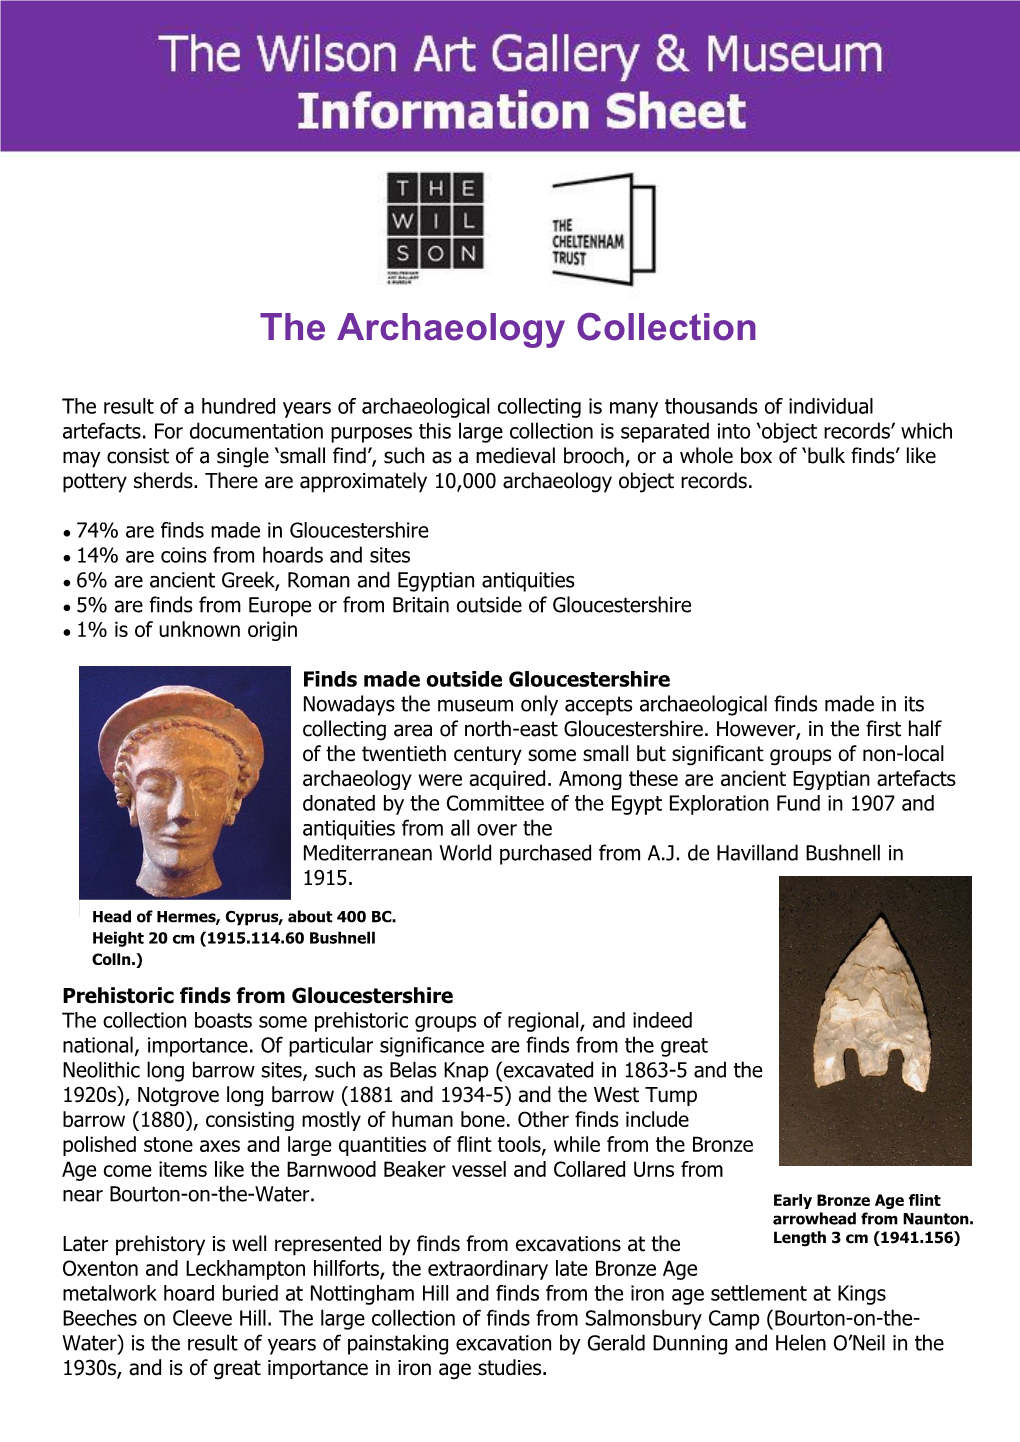 The Archaeology Collection